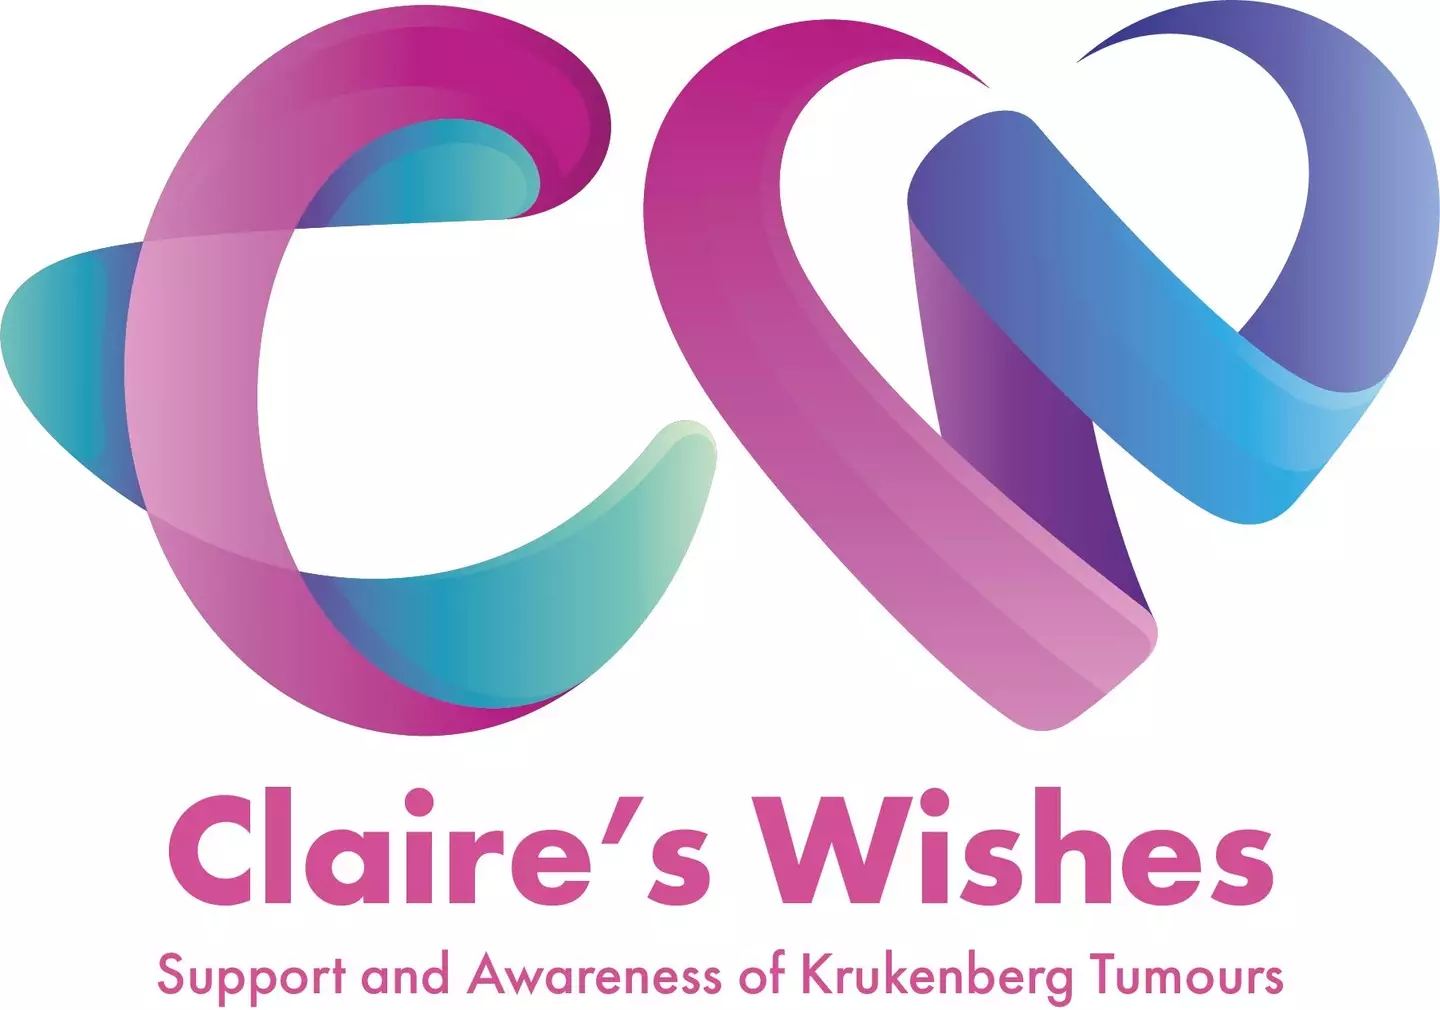 Claire's Wishes was founded in a bid to help support and educate people about Krukenberg tumours. (Claire's Wishes)